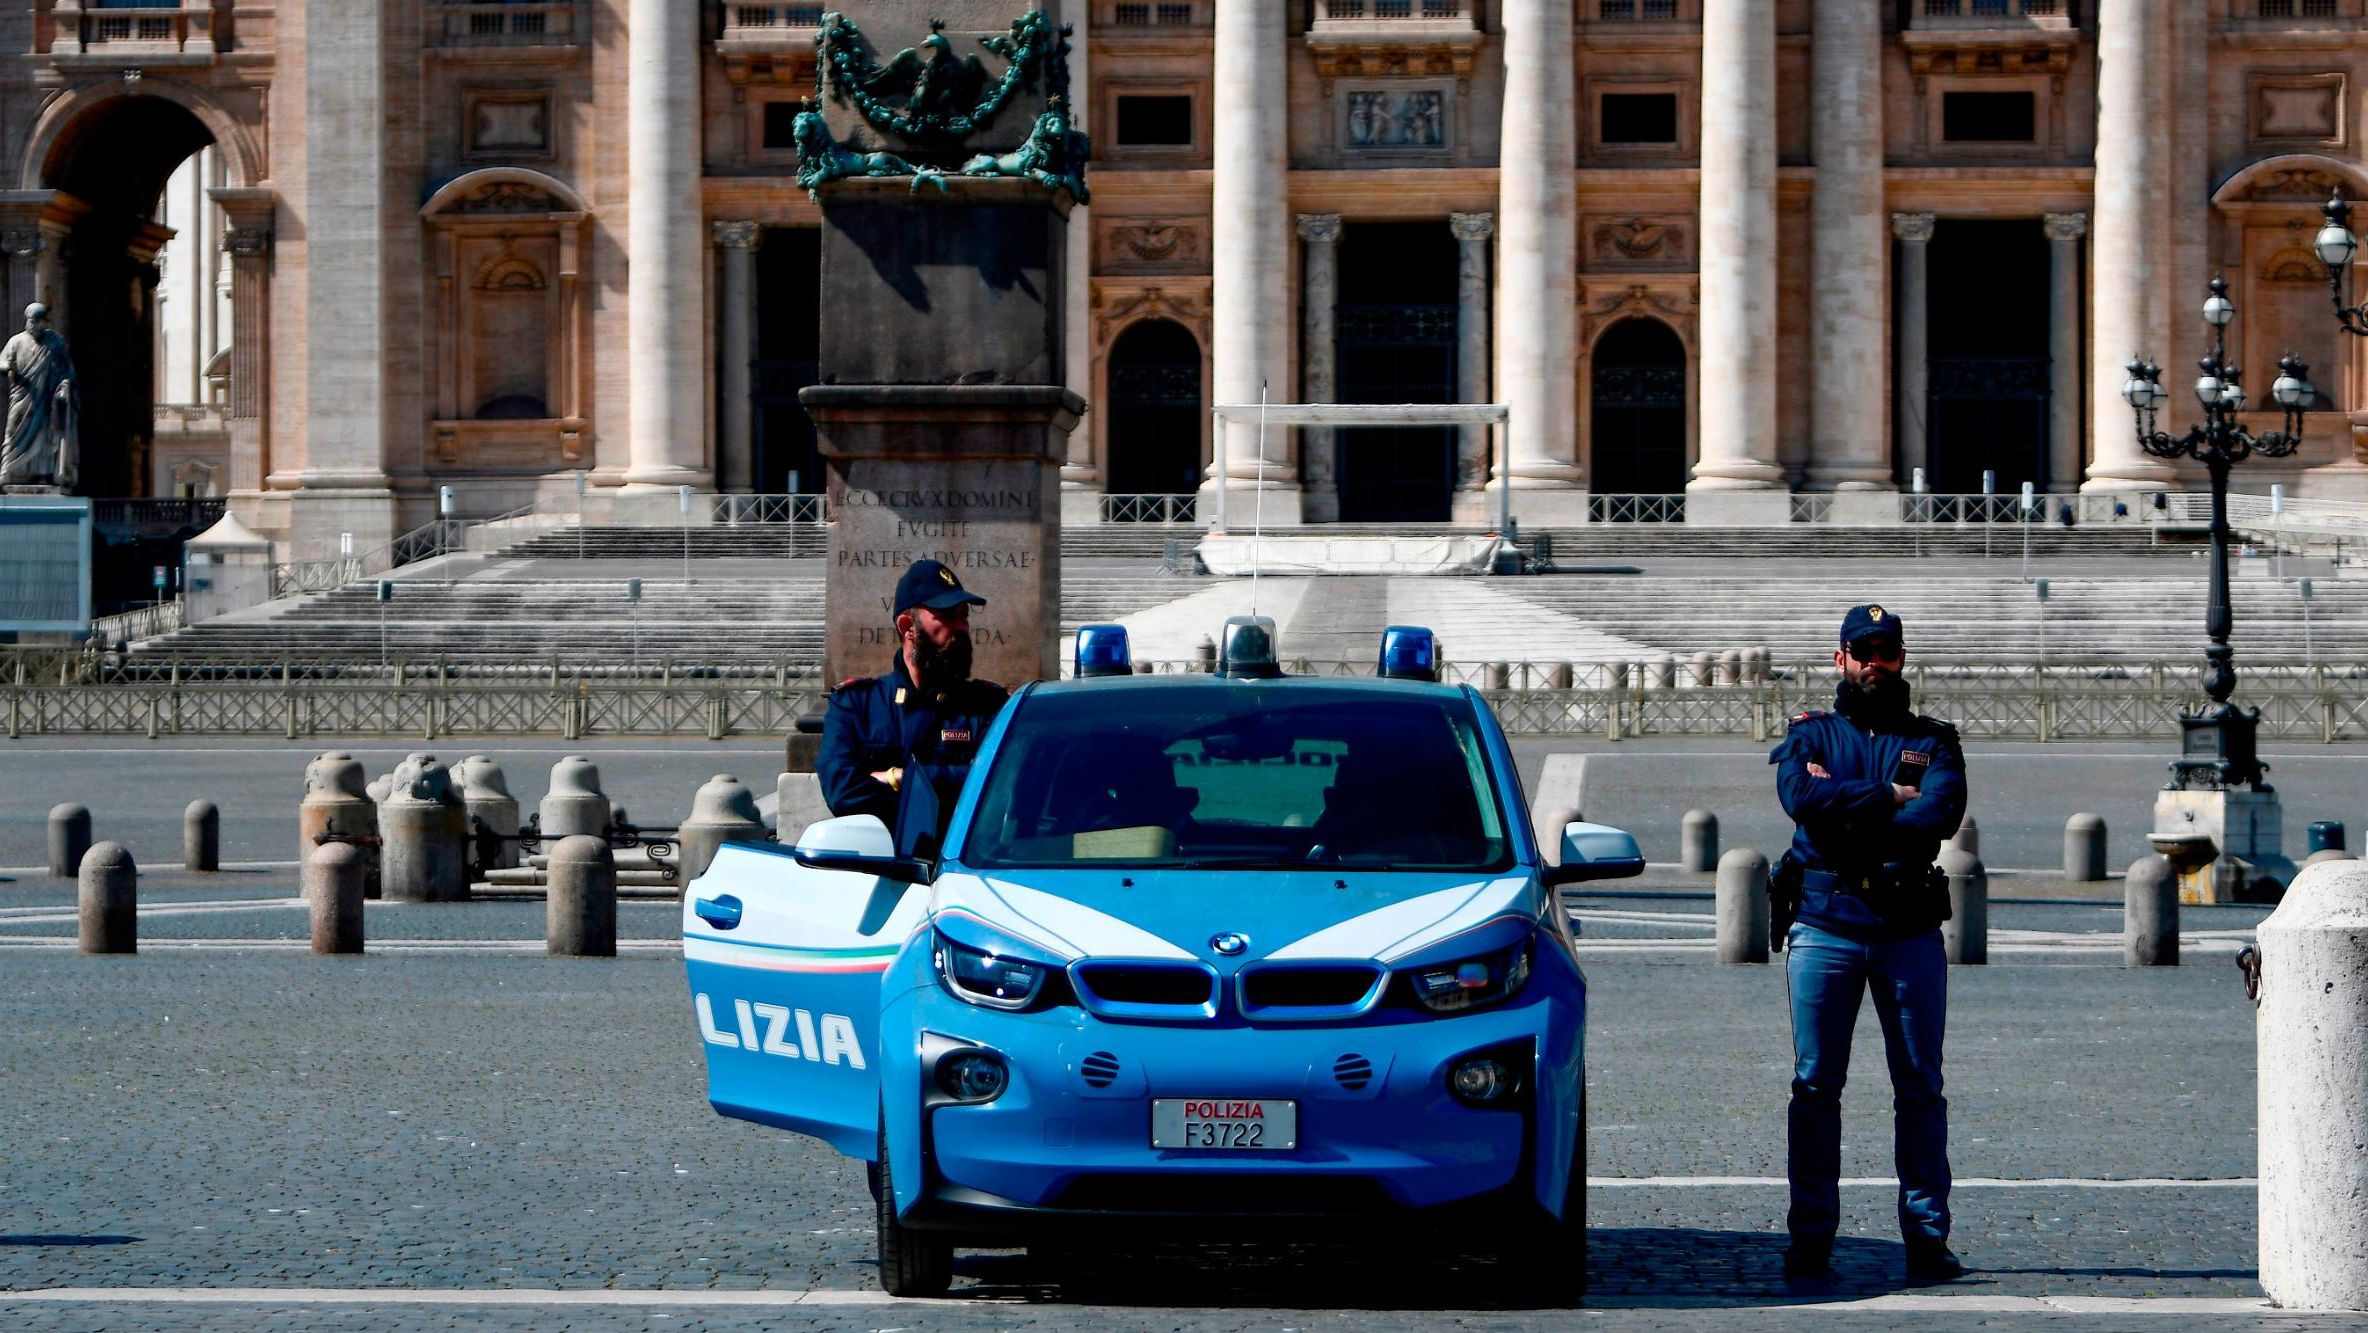 Italian police officers stand guard at a closed St. Peter's Square in the Vatican.